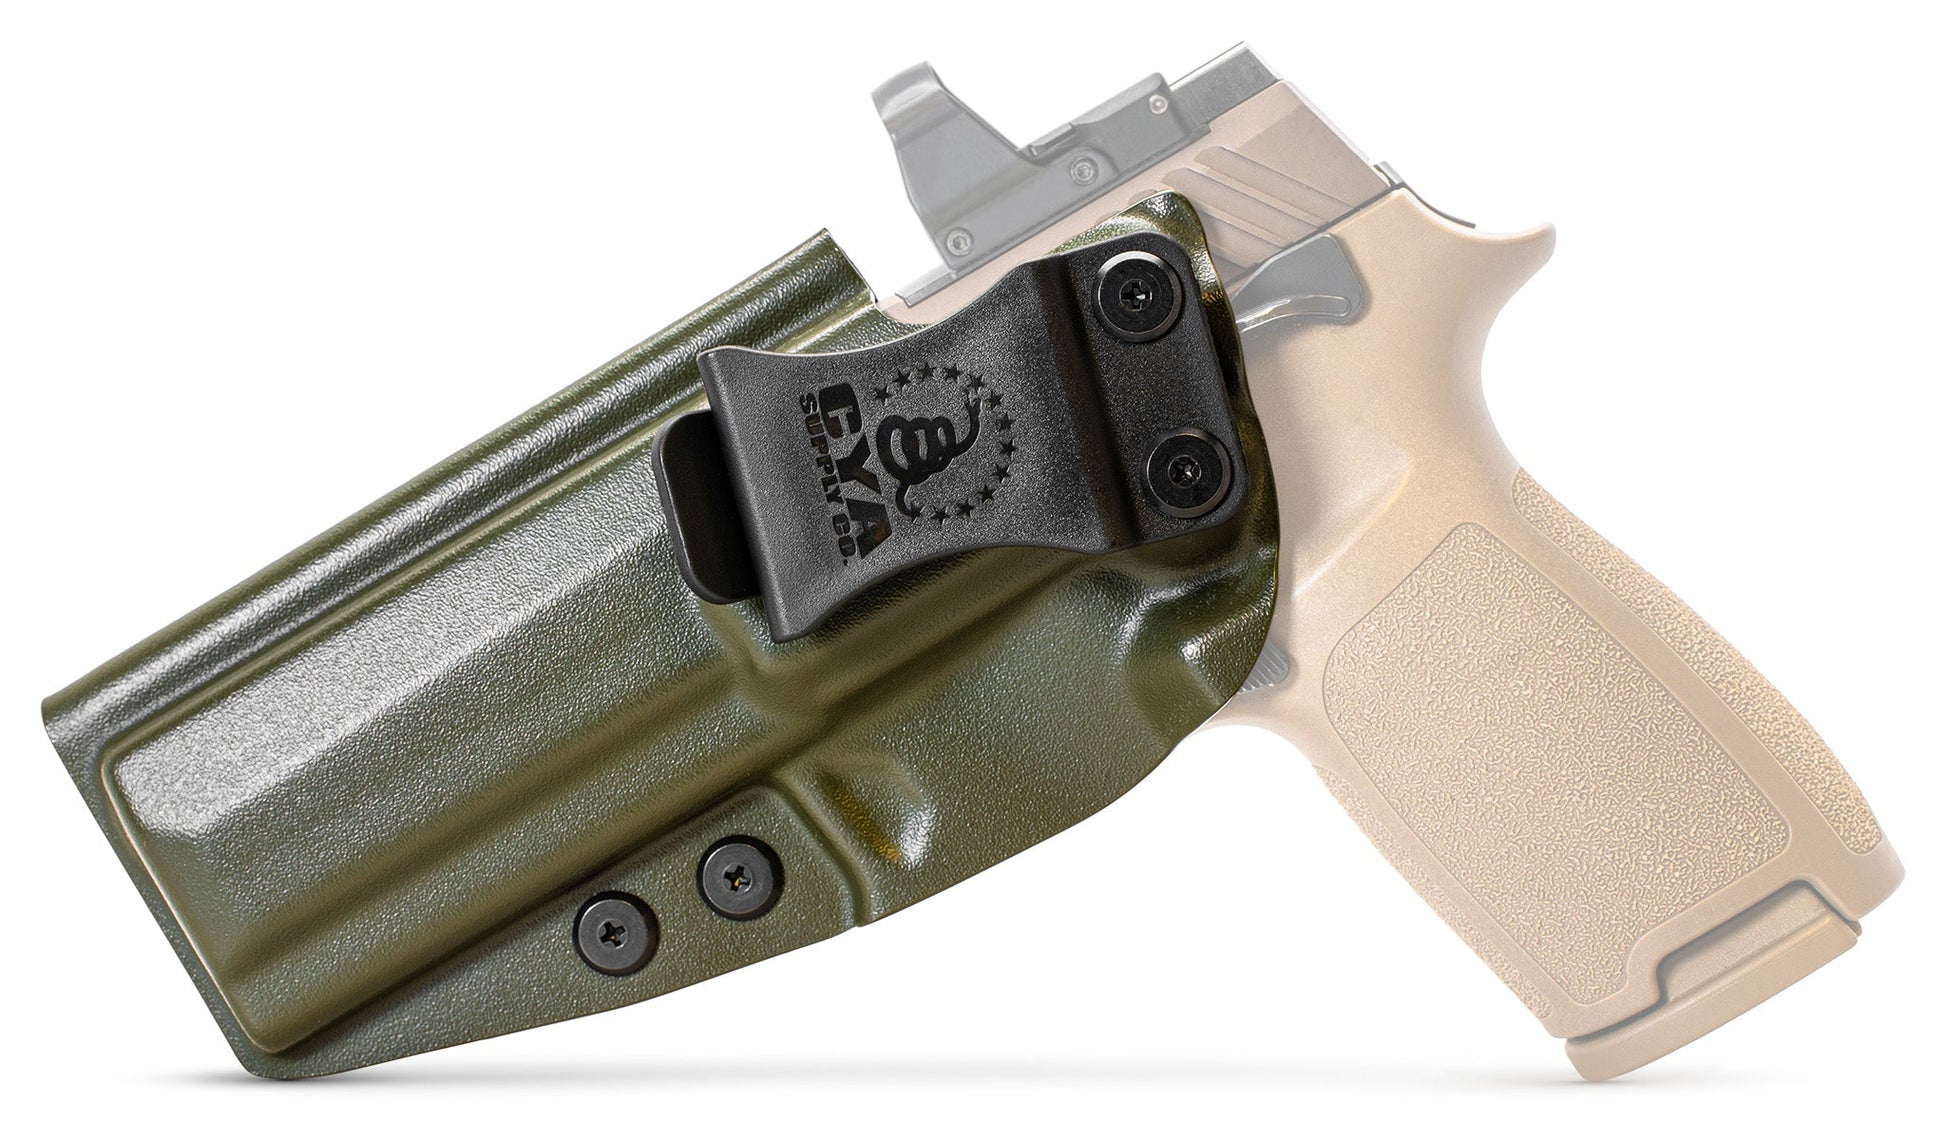 CYA Full size Holster in od green with a black clip on a tan sig sauer p320 handgun